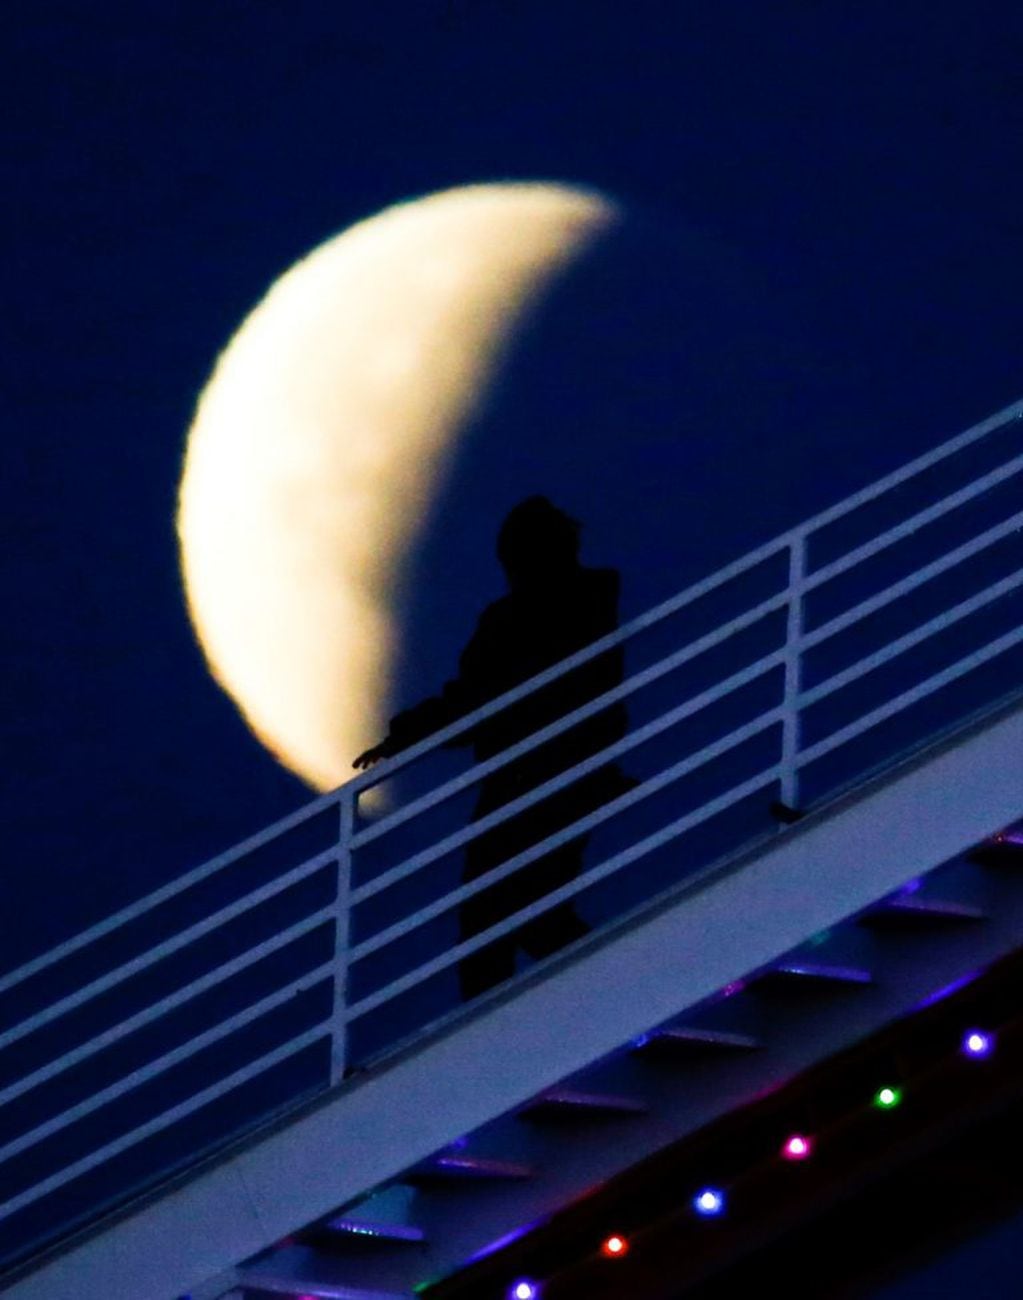 A worker of Pacific Park is silhouetted walks in front of a rare occurrence called a 'Super Blue Blood Moon' at Santa Monica Beach in Santa Monica, Calif., Wednesday, Jan. 31, 2018.   It's the first time in 35 years a blue moon has synced up with a supermoon and a total lunar eclipse, or blood moon because of its red hue. Hawaii and Alaska had the best seats, along with the Canadian Yukon, Australia and Asia. The western U.S. also had good viewing, along with Russia.  (AP Photo/Ringo H.W. Chiu)